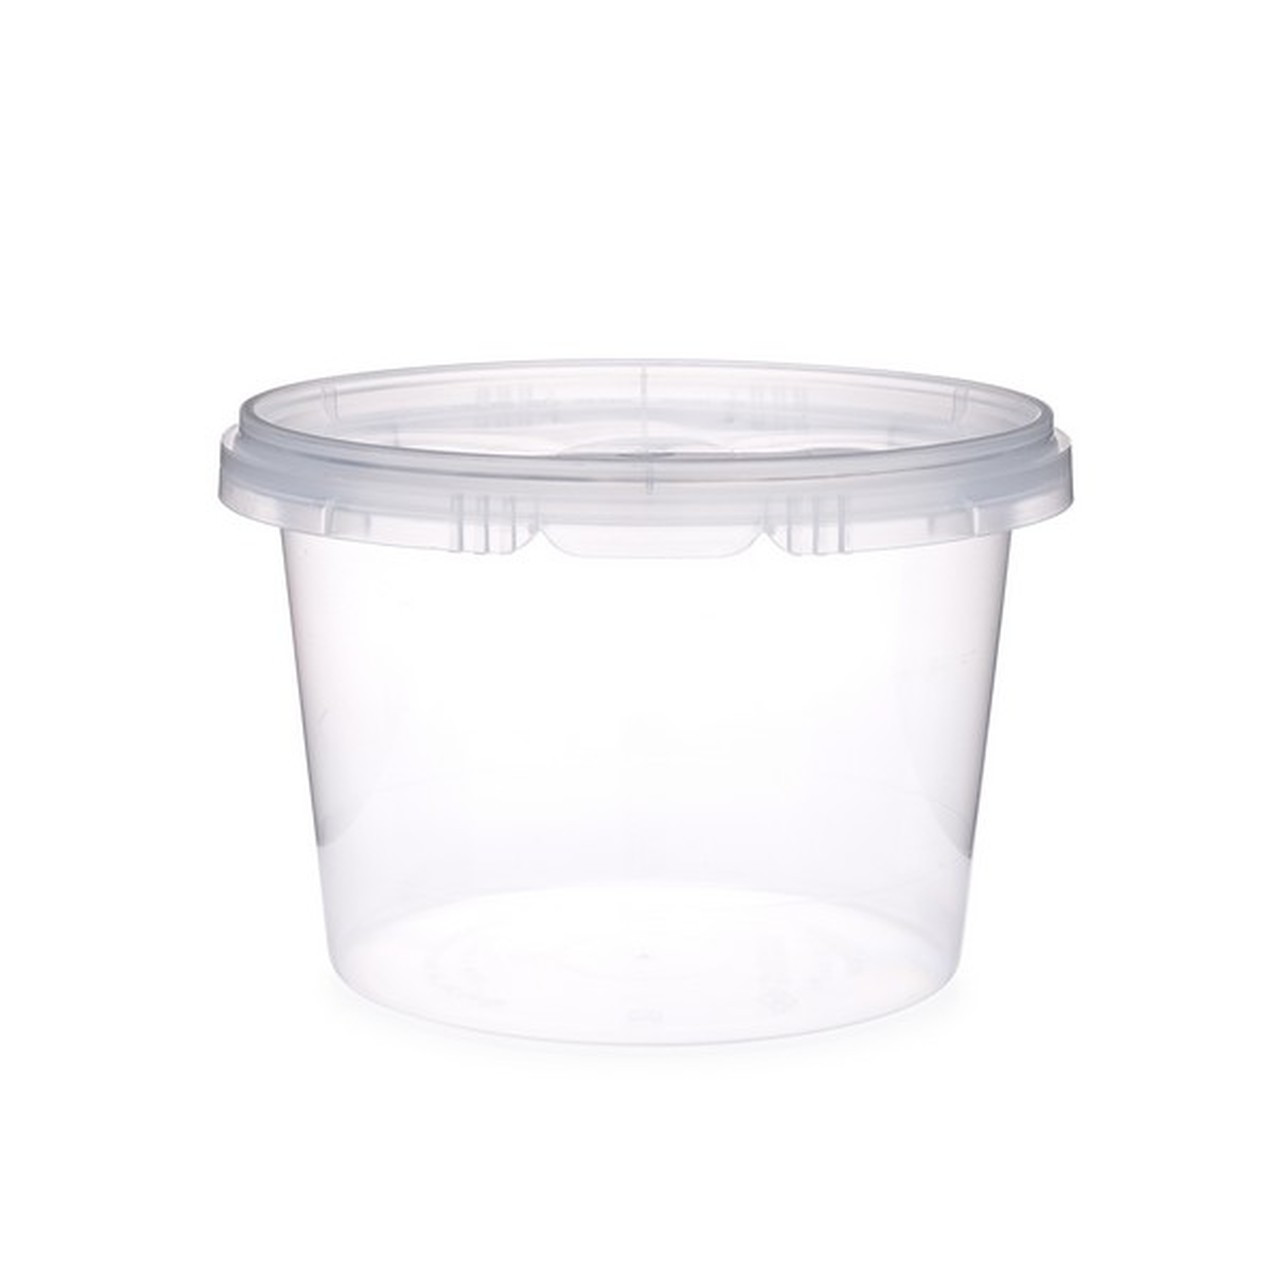 https://cdn10.bigcommerce.com/s-fo6yw/products/895/images/3004/Pint_16oz_Ink_Container_-_Snap_Lock_Lid__33057.1579897868.1280.1280.jpg?c=2